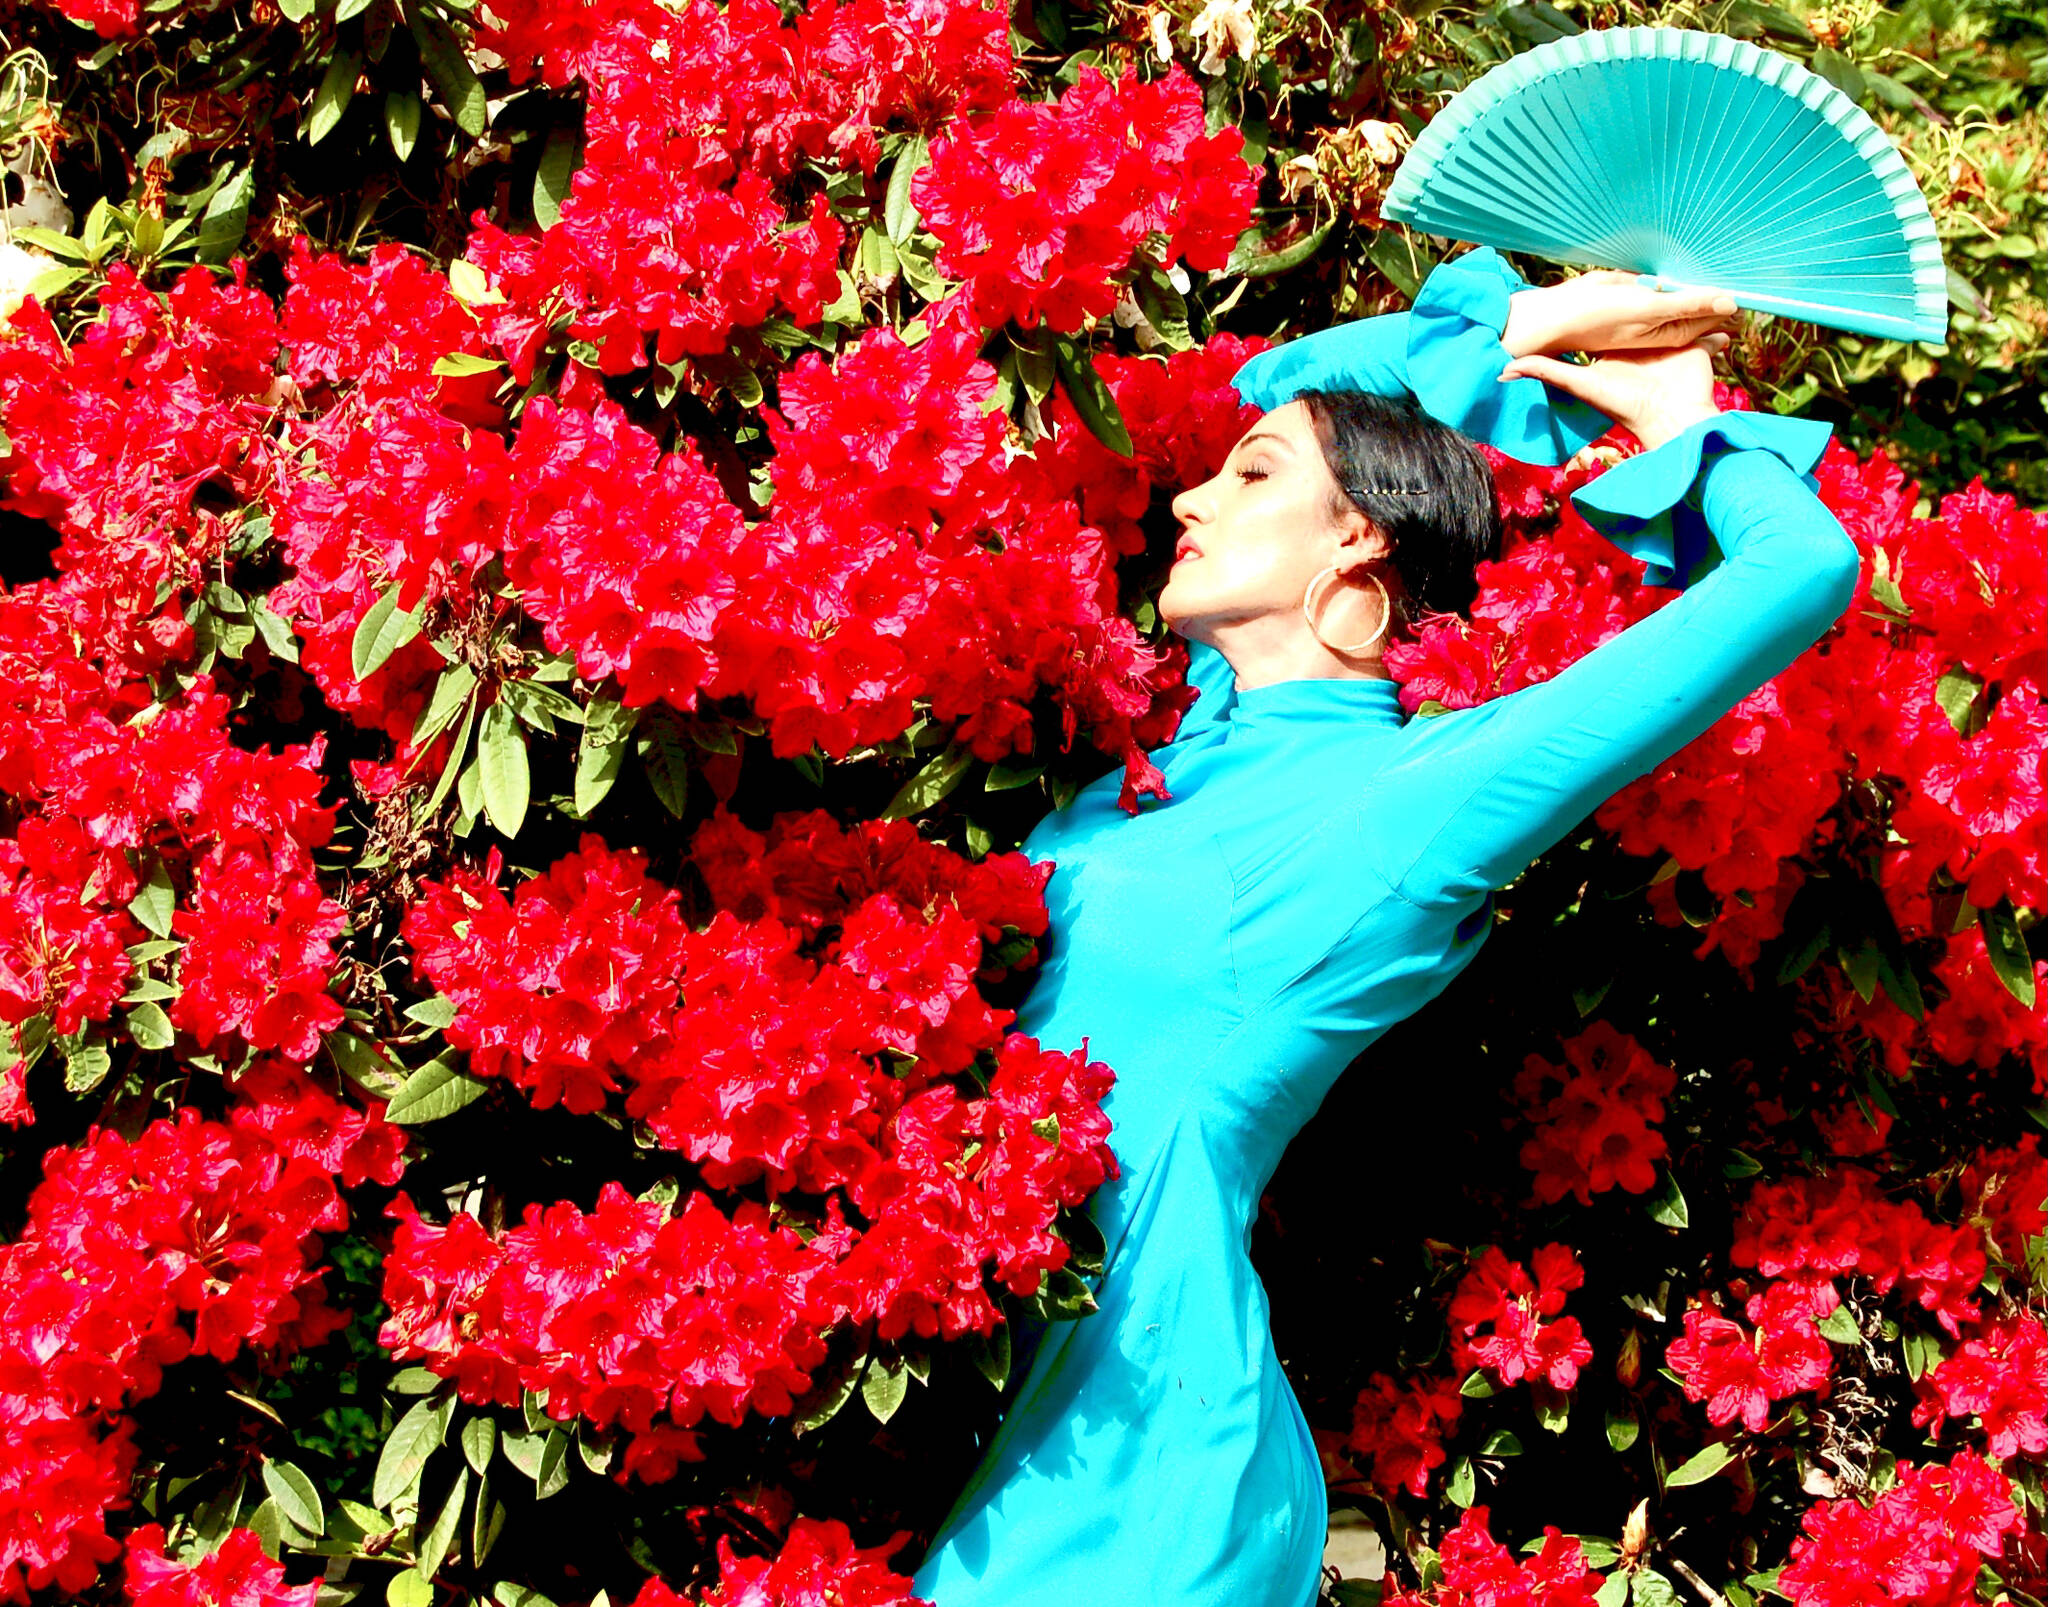 Savannah Fuentes will be performing traditional flamenco dancing in Langley. (Photo provided by Savannah Fuentes)